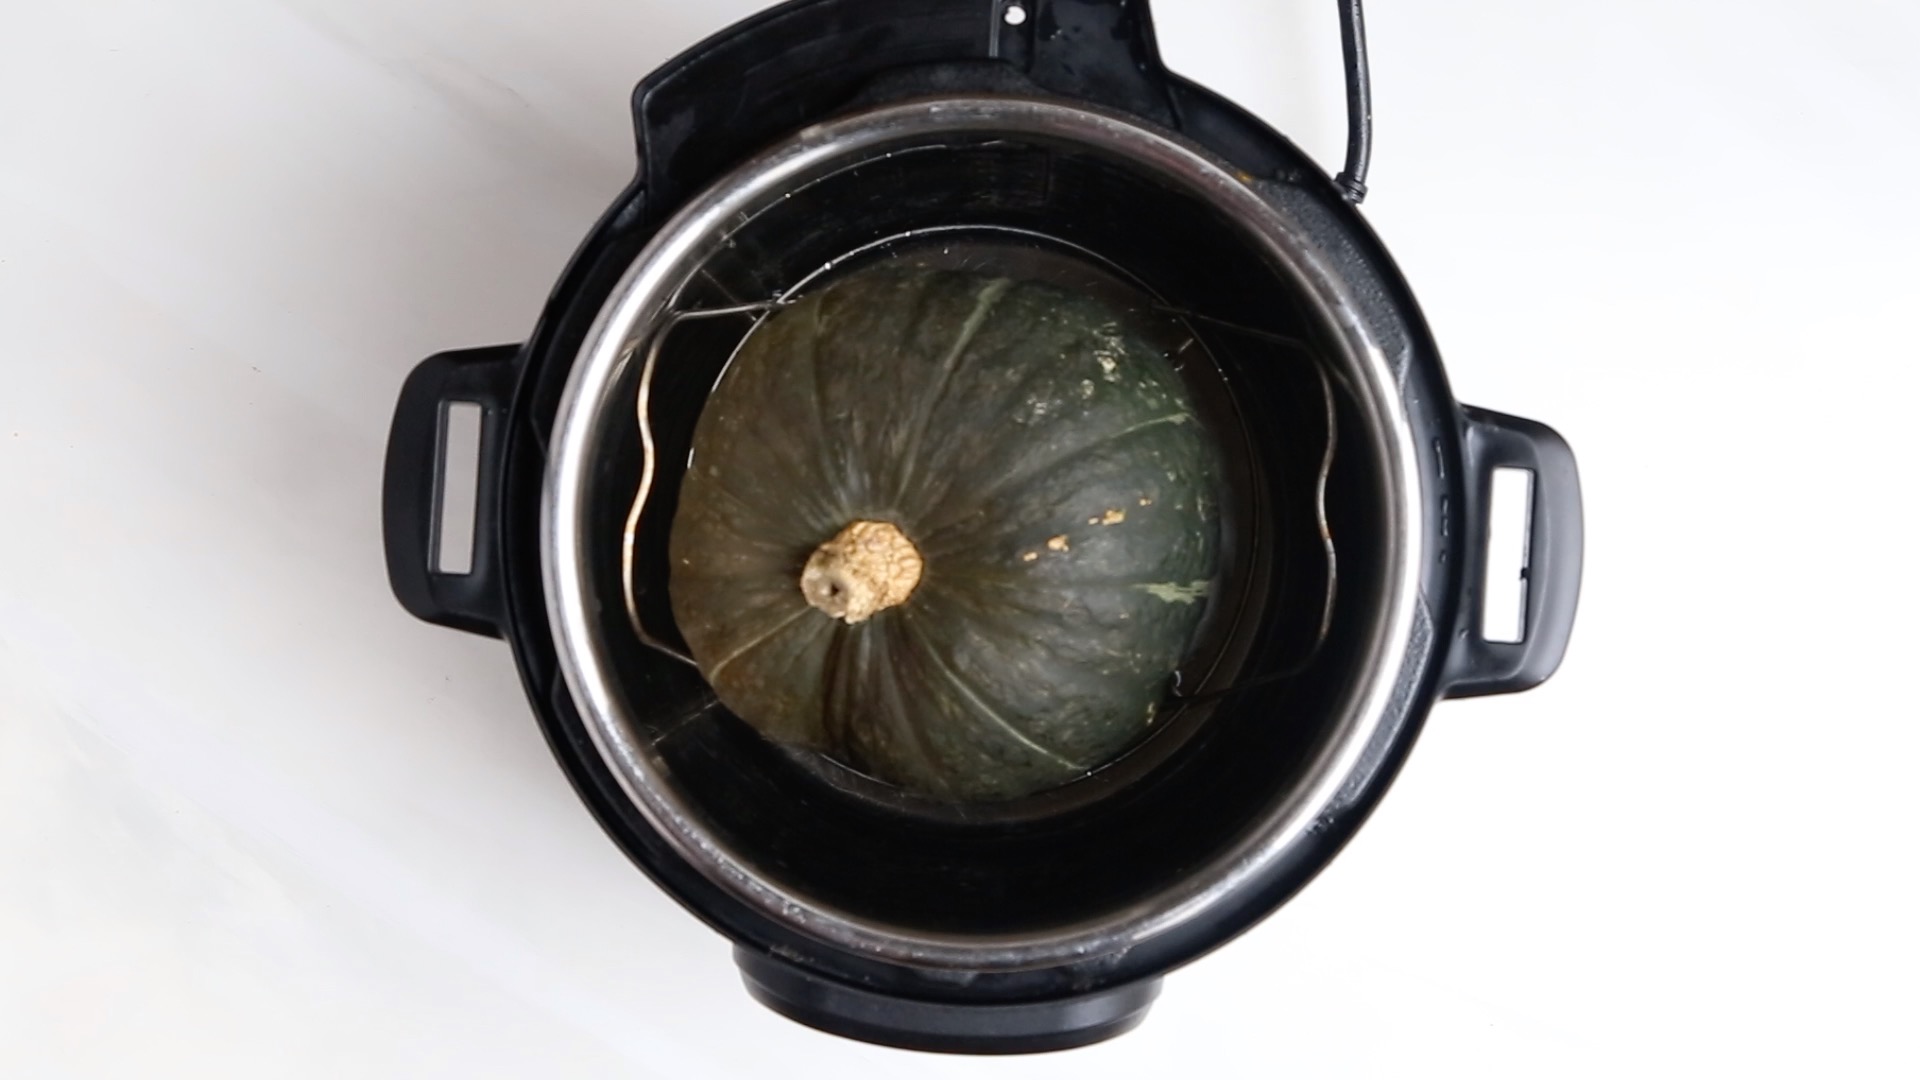 How to cook a kabocha squash in an Instant Pot. This method works well for all hard winter squash!